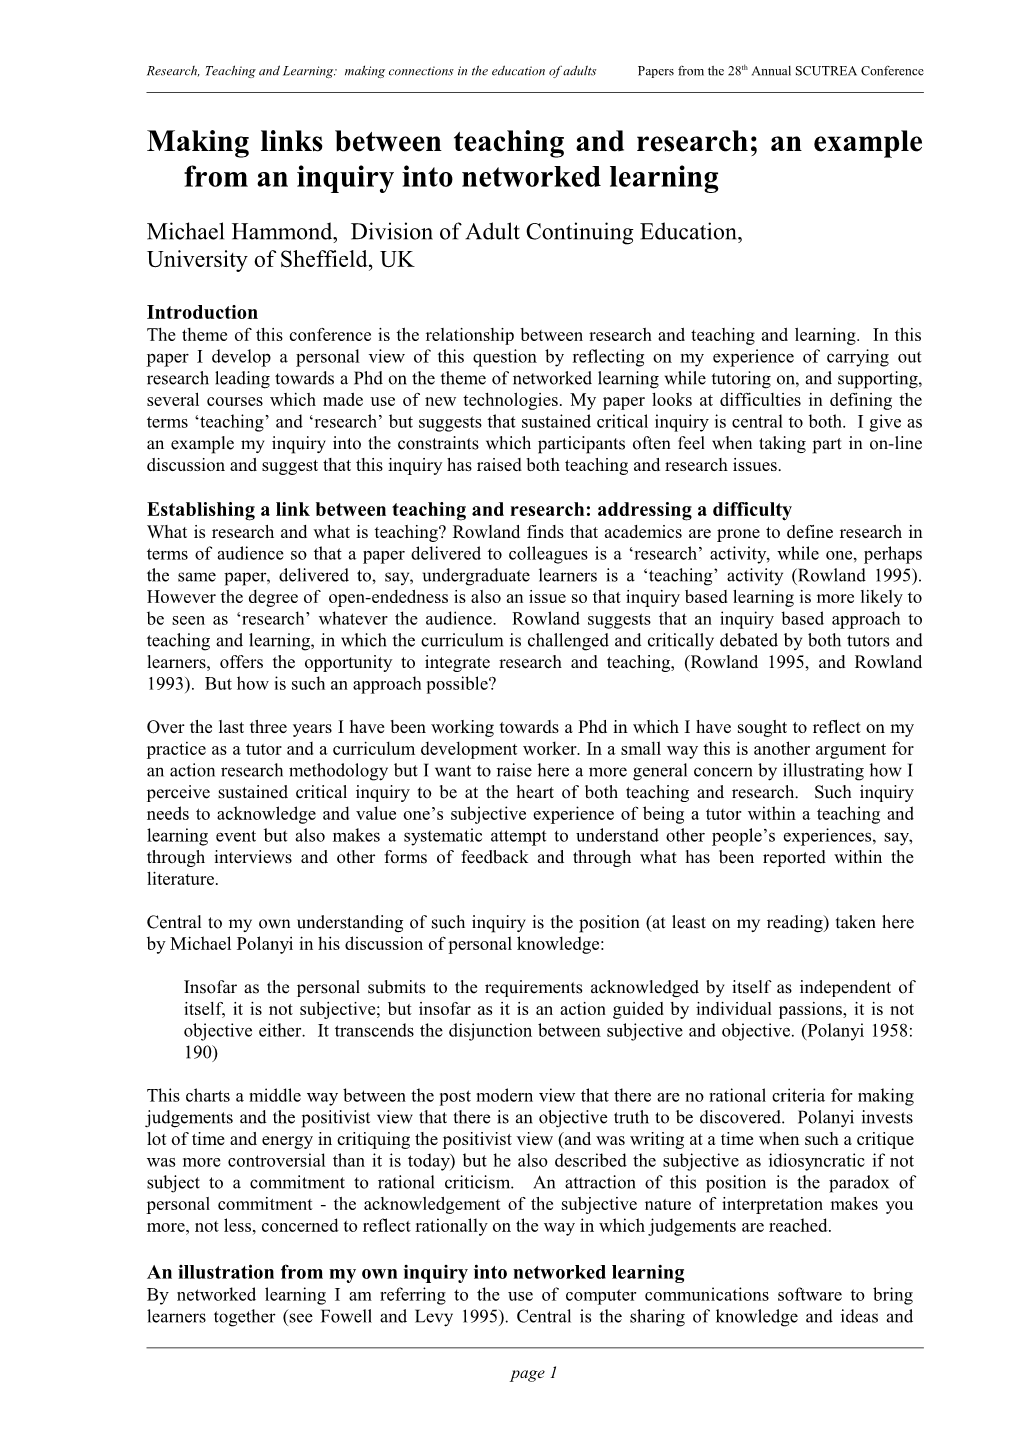 Making Links Between Teaching and Research; an Example from an Inquiry Into Networked Learning